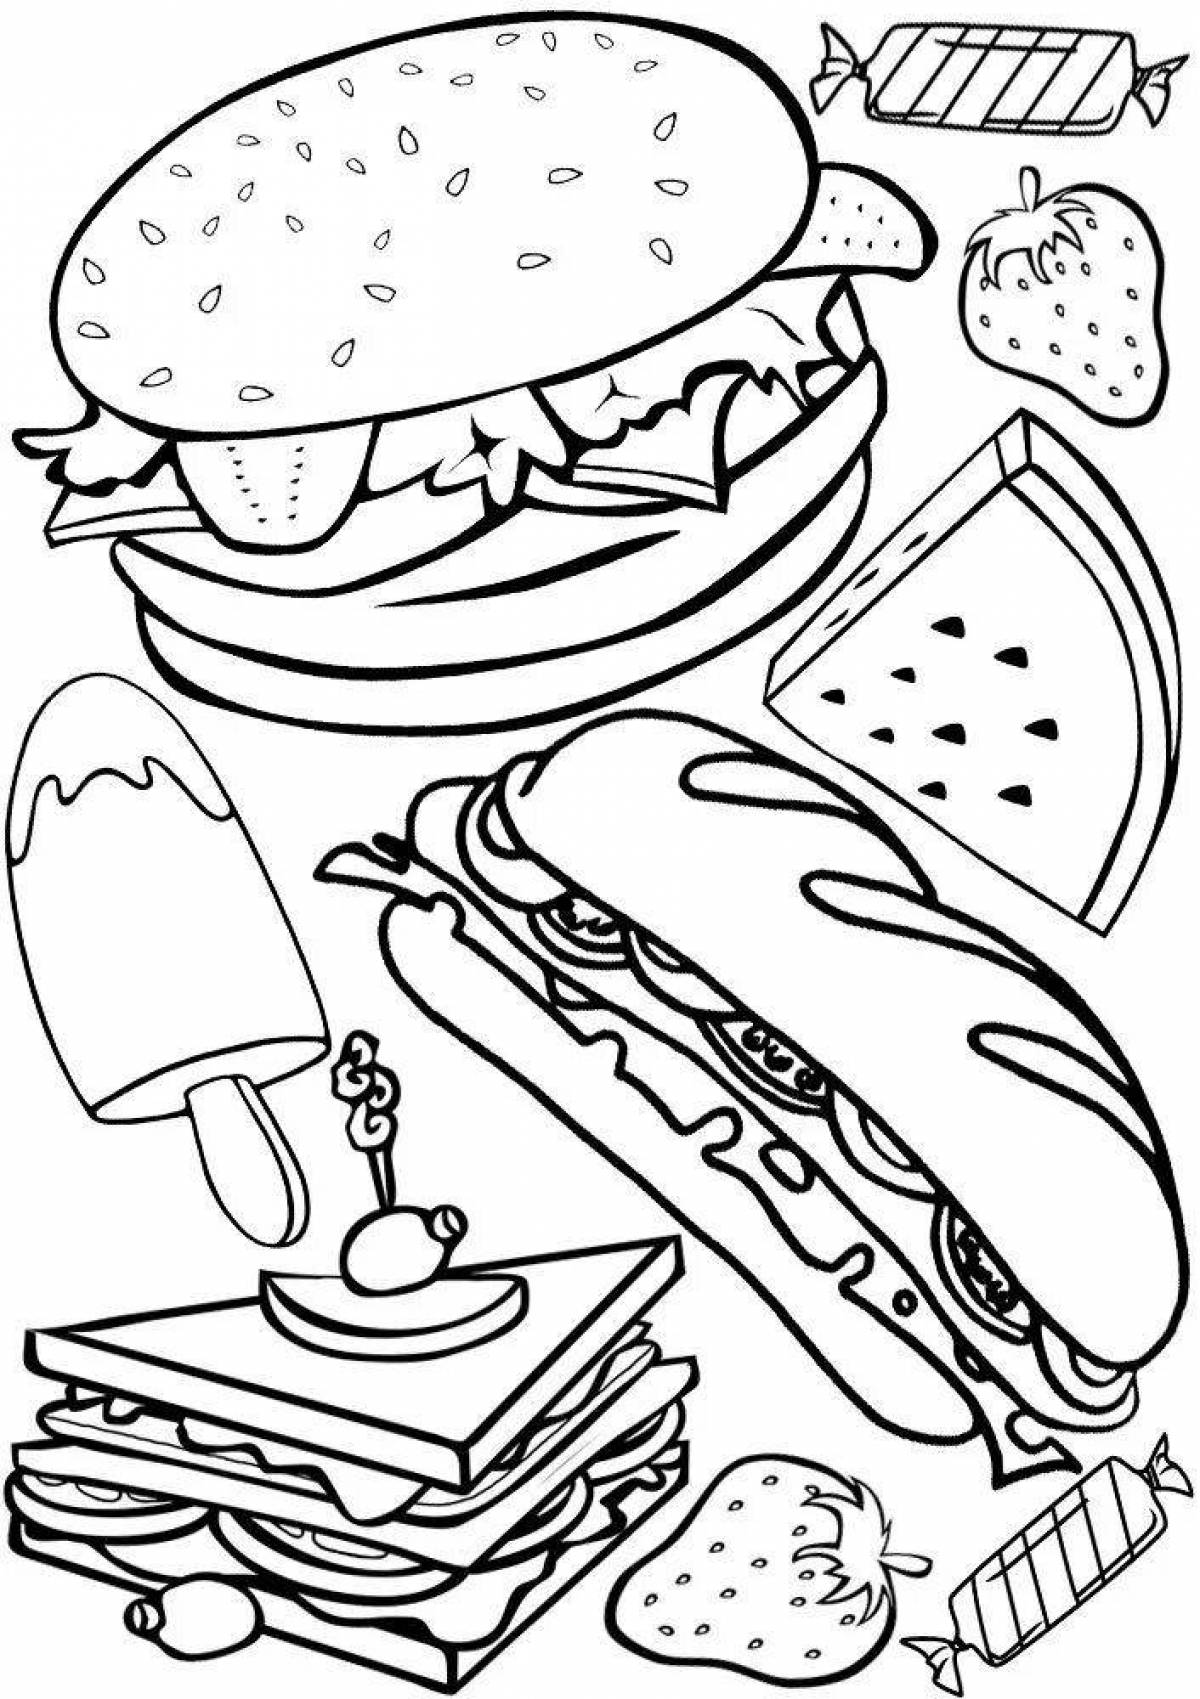 Luxury burger king coloring book